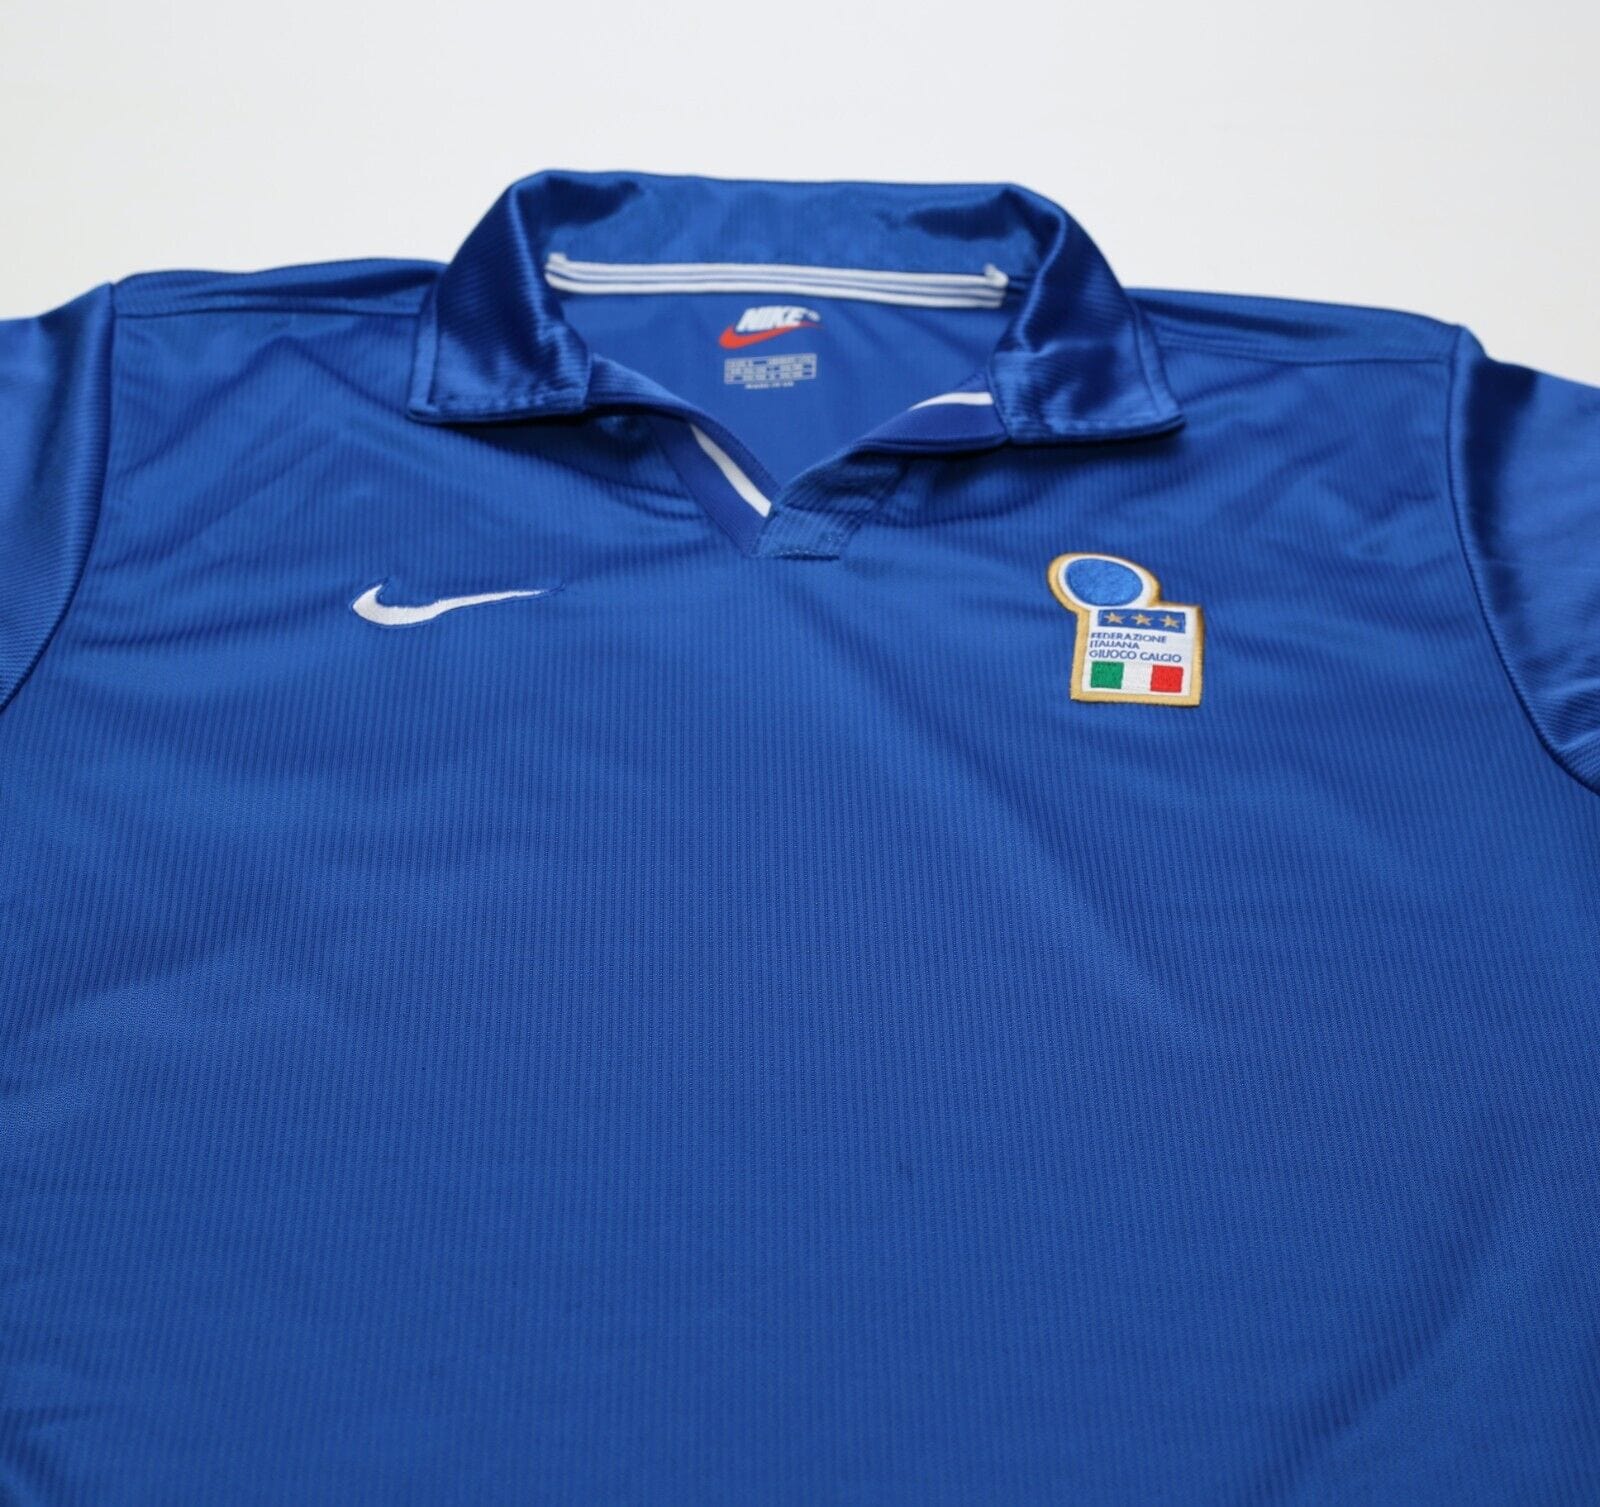 1997/98 ITALY Vintage Nike Home Football Shirt JERSEY (S) World Cup 98